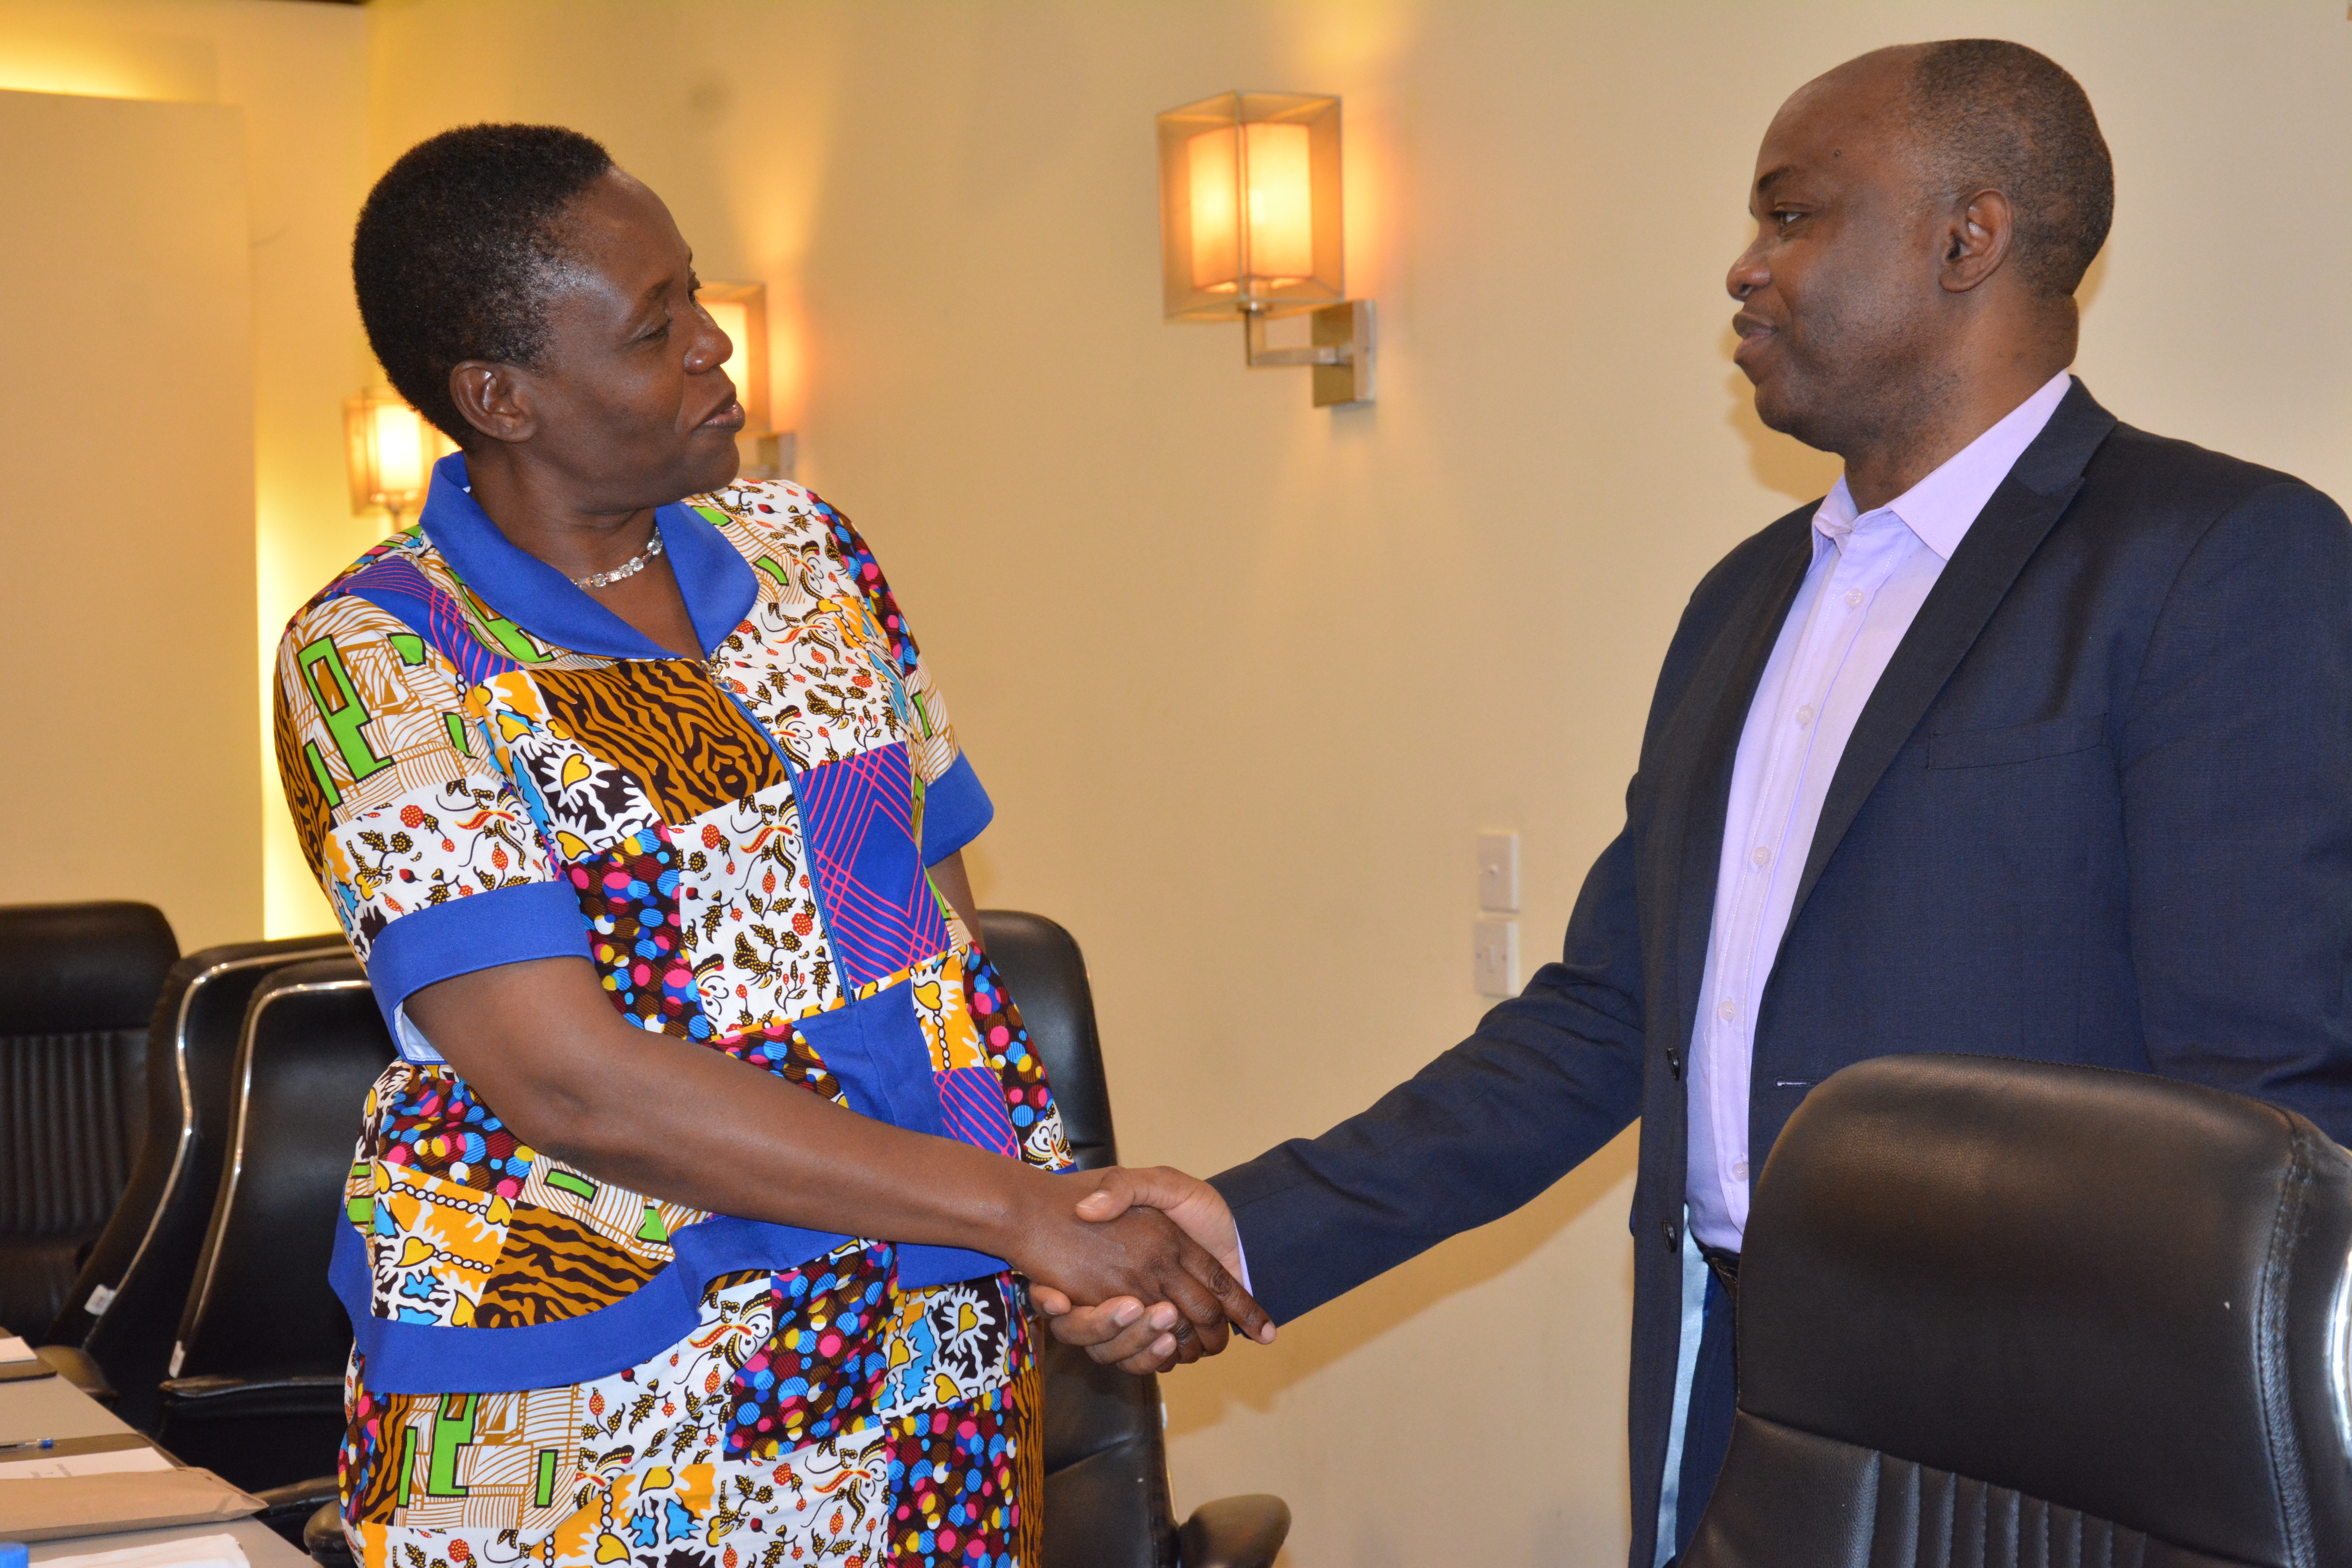 The Regional Director with the Minister of Community Development, Gender, Women and Special Groups, Hon. Dr. Dorothy Gwajima. Photo: UN Women Tanzania.